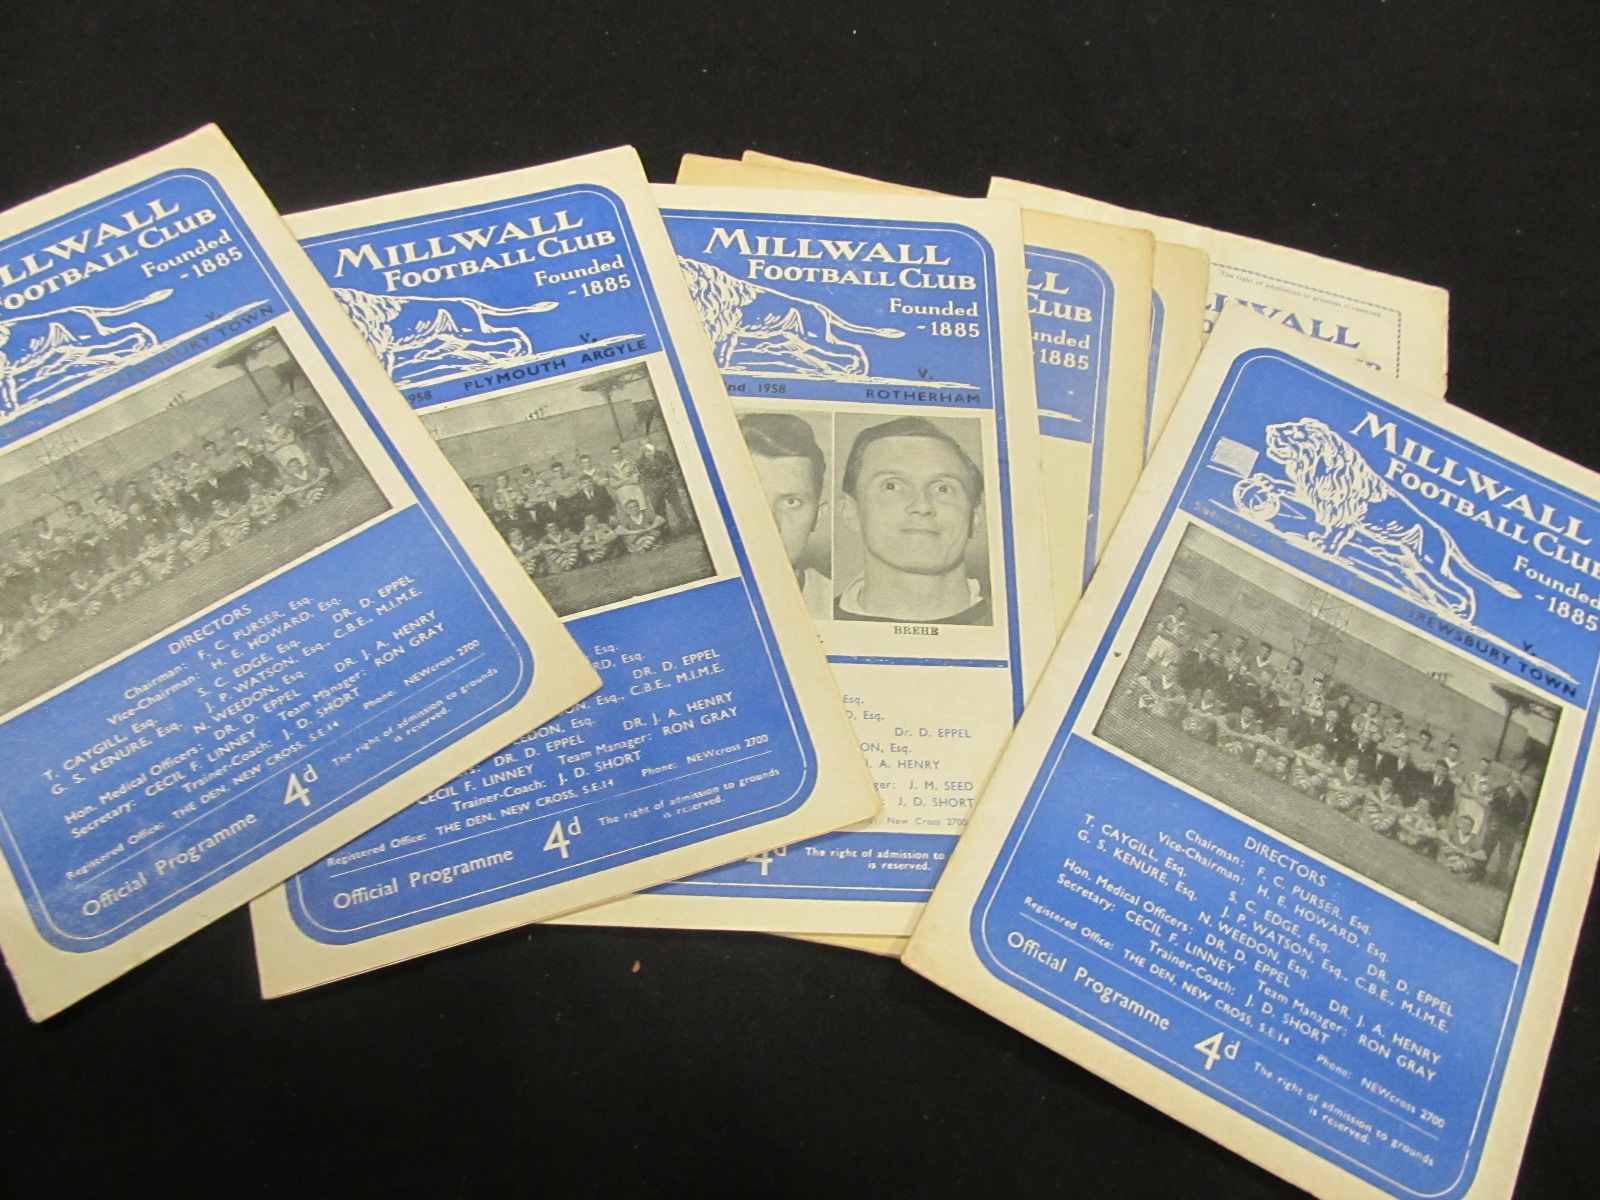 Football programmes - Millwall home games c1954/1959 (approx 22)